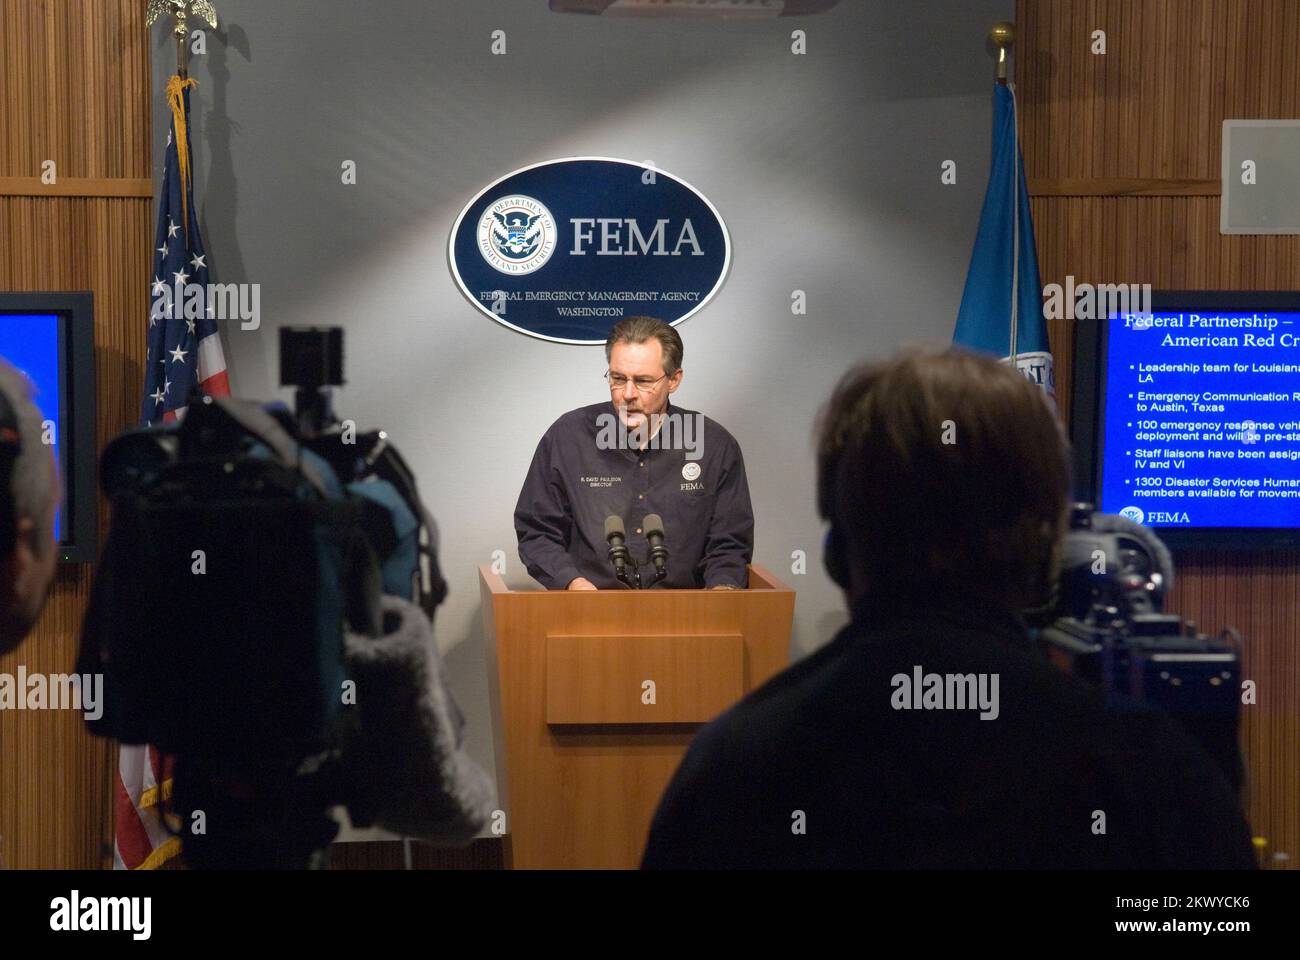 Paulison briefs the press on Hurricane Dean.. Photographs Relating to Disasters and Emergency Management Programs, Activities, and Officials Stock Photo